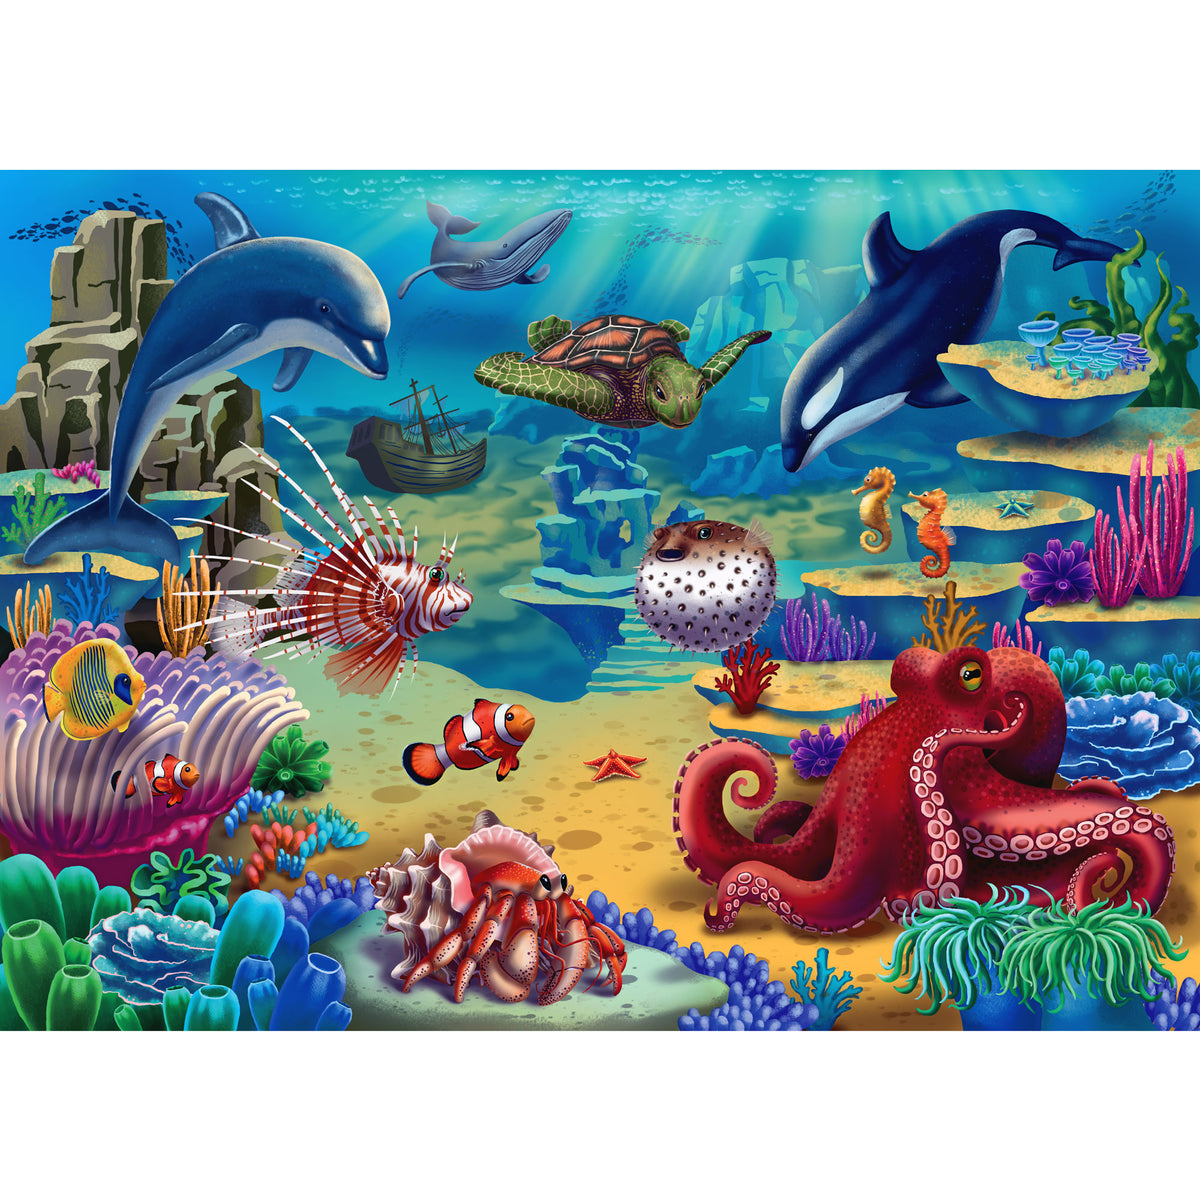 Colorful Underwater World Panel 45x60"